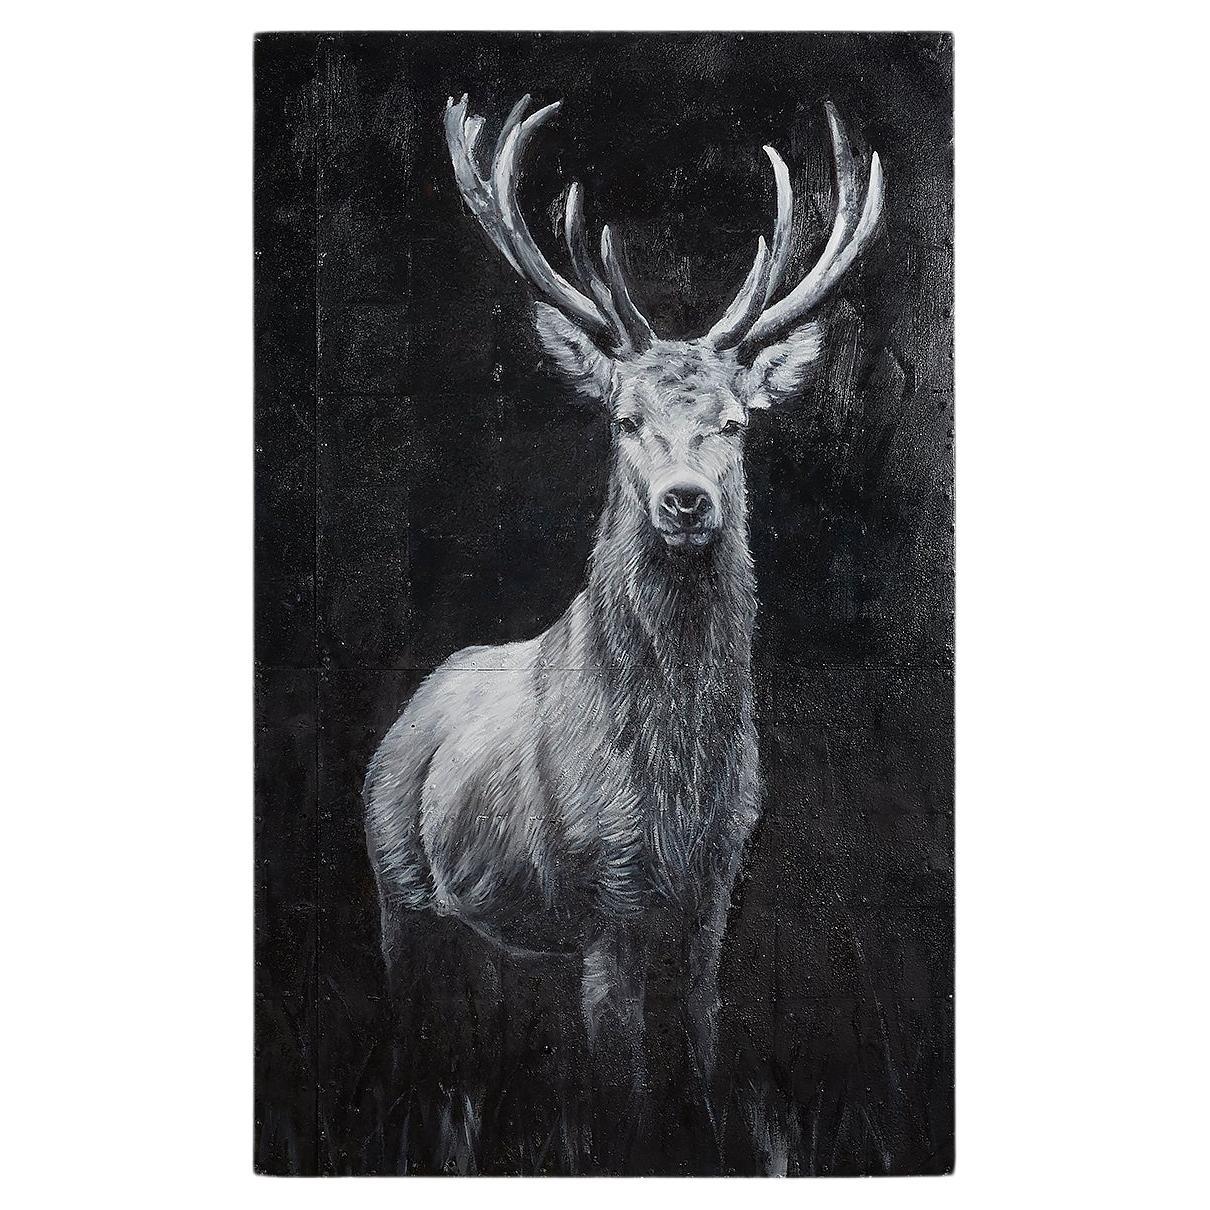 Oil Painting "Deer II" by Collective BAP